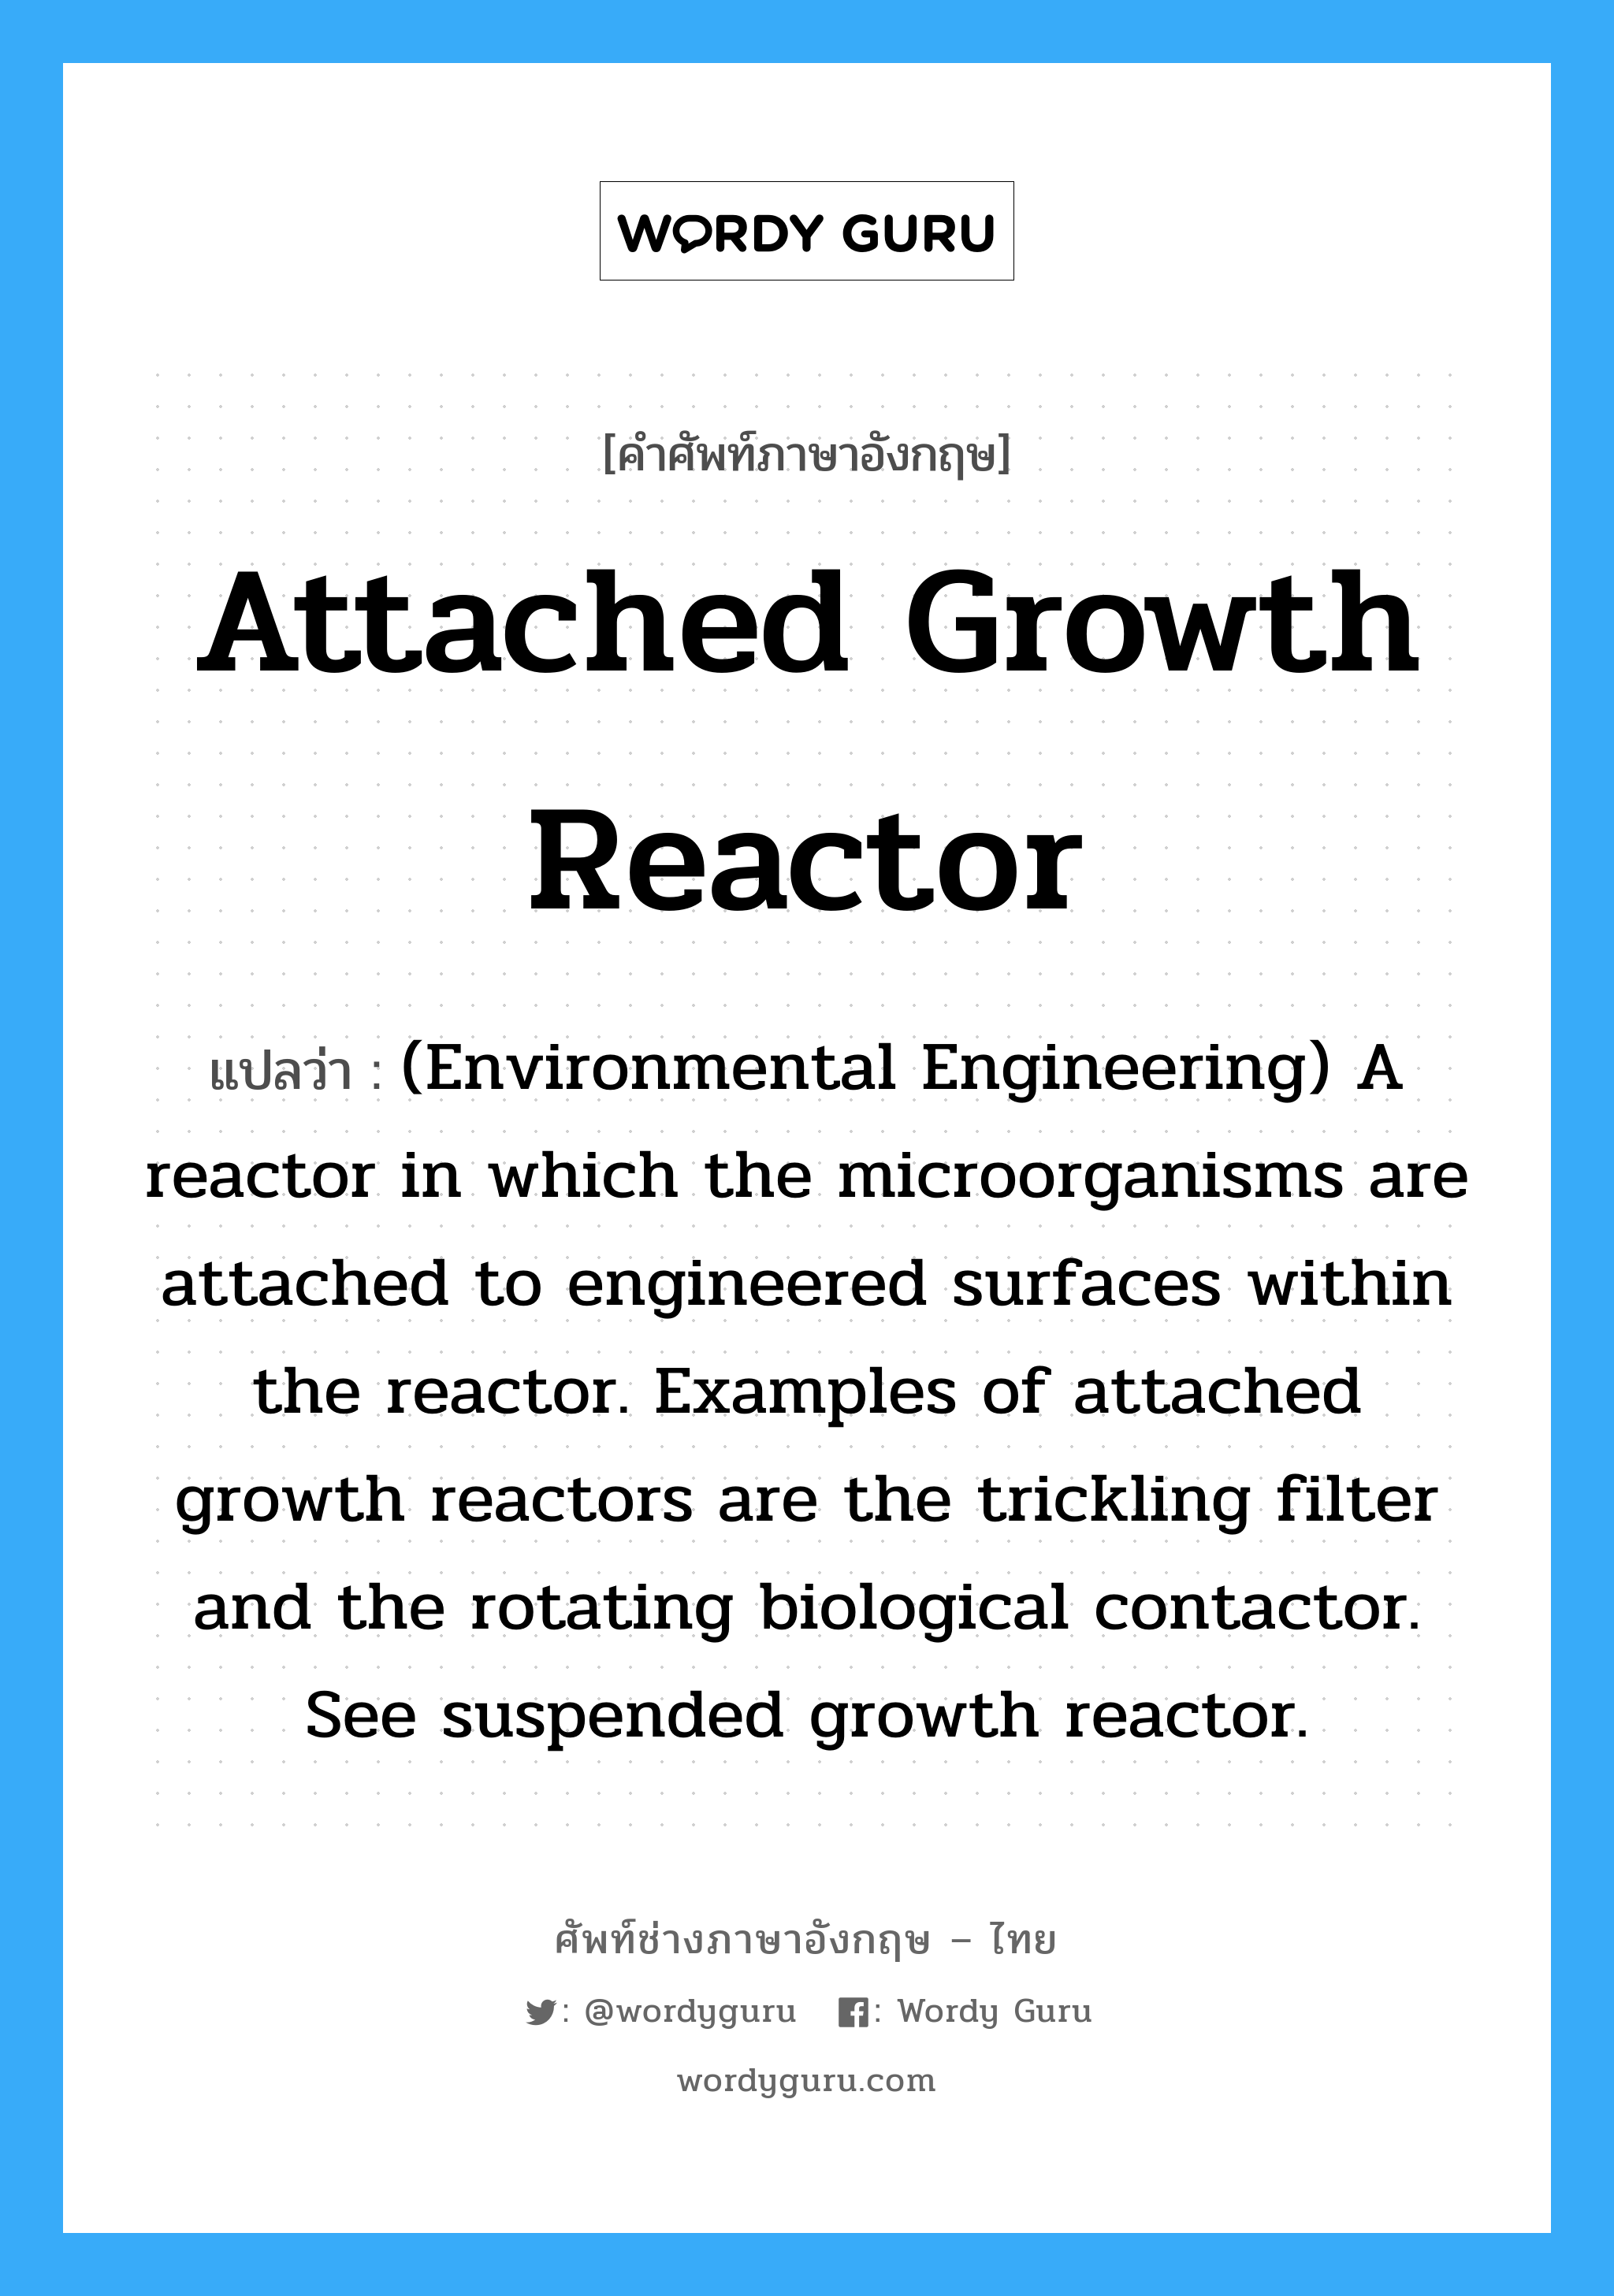 Attached growth reactor แปลว่า?, คำศัพท์ช่างภาษาอังกฤษ - ไทย Attached growth reactor คำศัพท์ภาษาอังกฤษ Attached growth reactor แปลว่า (Environmental Engineering) A reactor in which the microorganisms are attached to engineered surfaces within the reactor. Examples of attached growth reactors are the trickling filter and the rotating biological contactor. See suspended growth reactor.